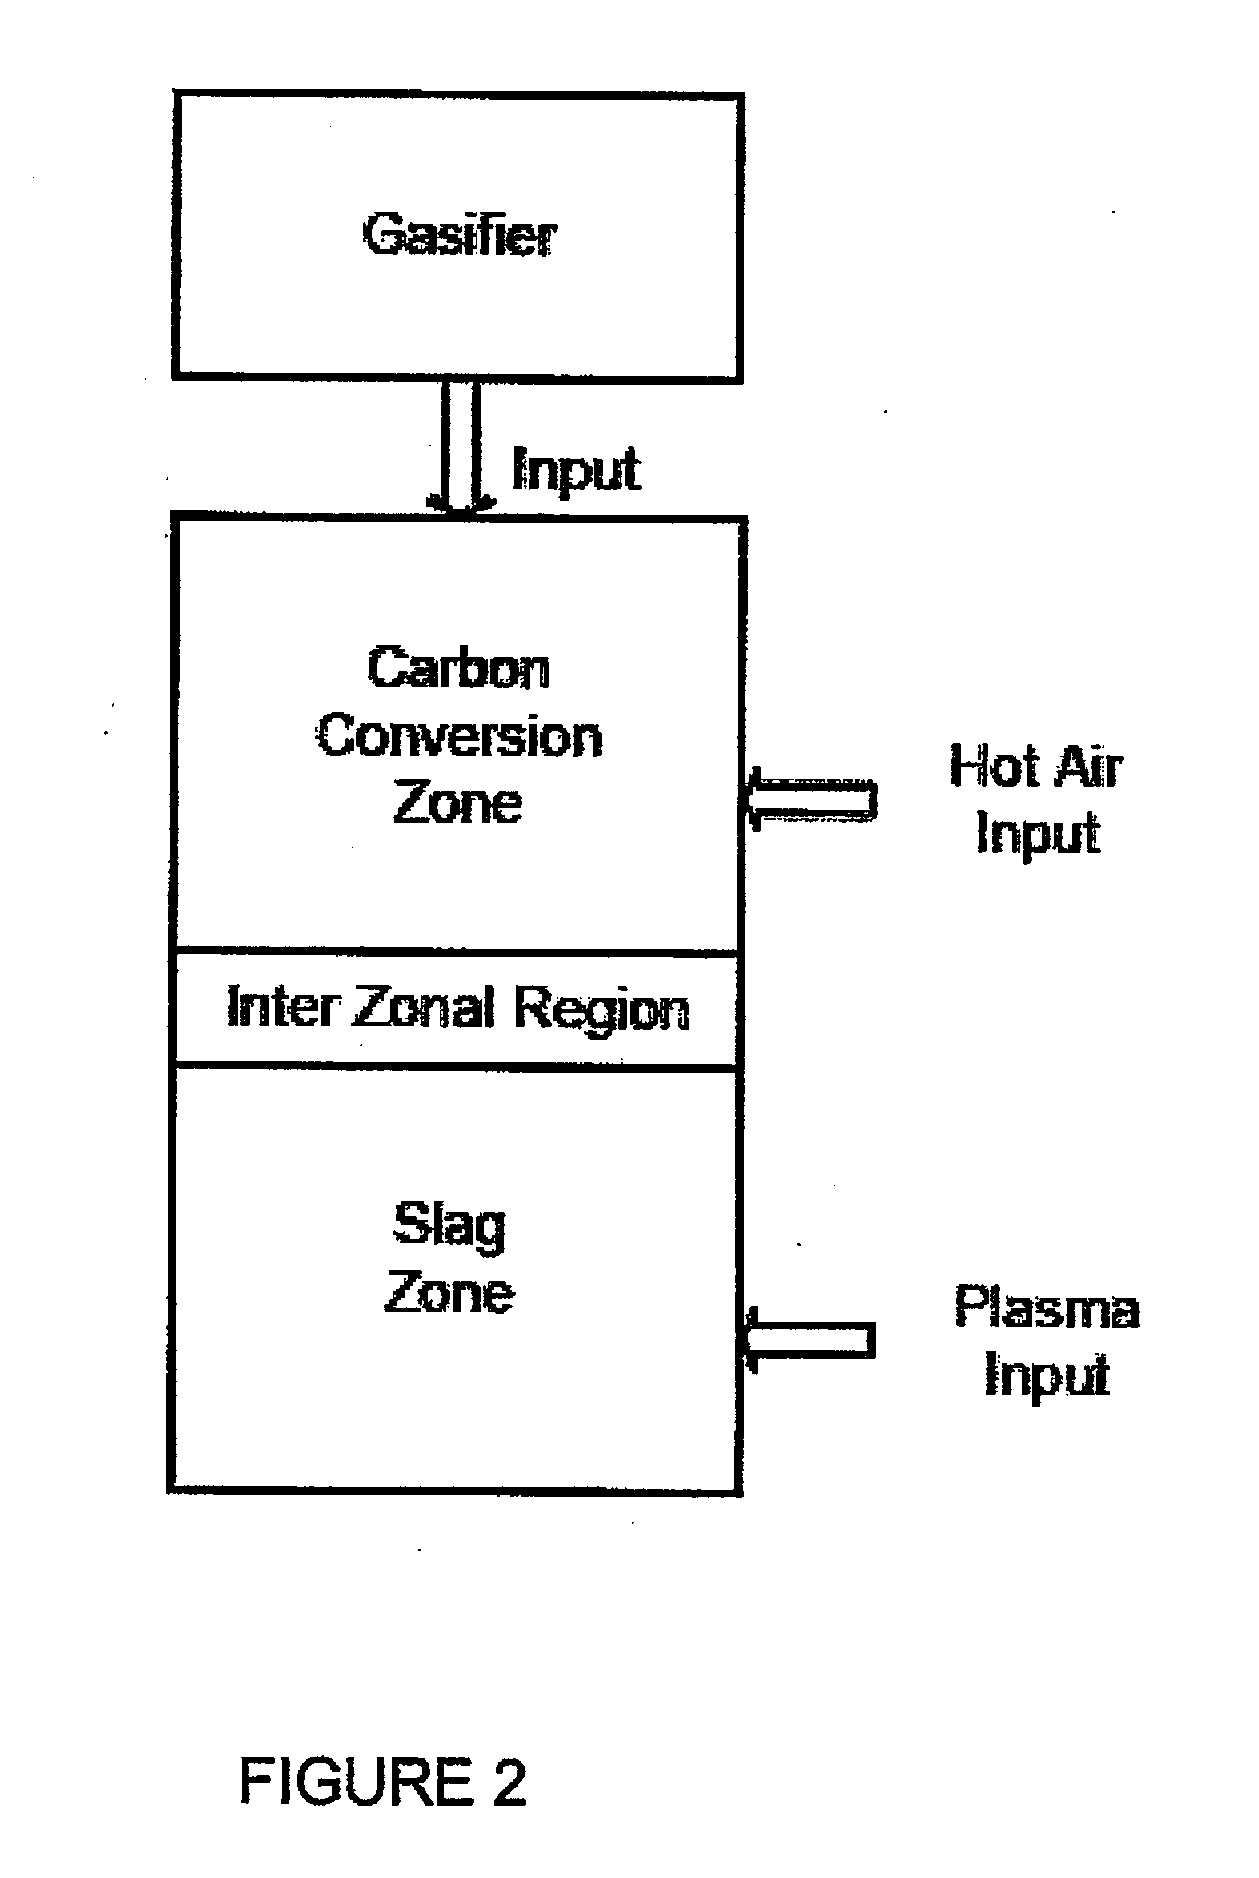 Multi-Zone Carbon Conversion System with Plasma Melting